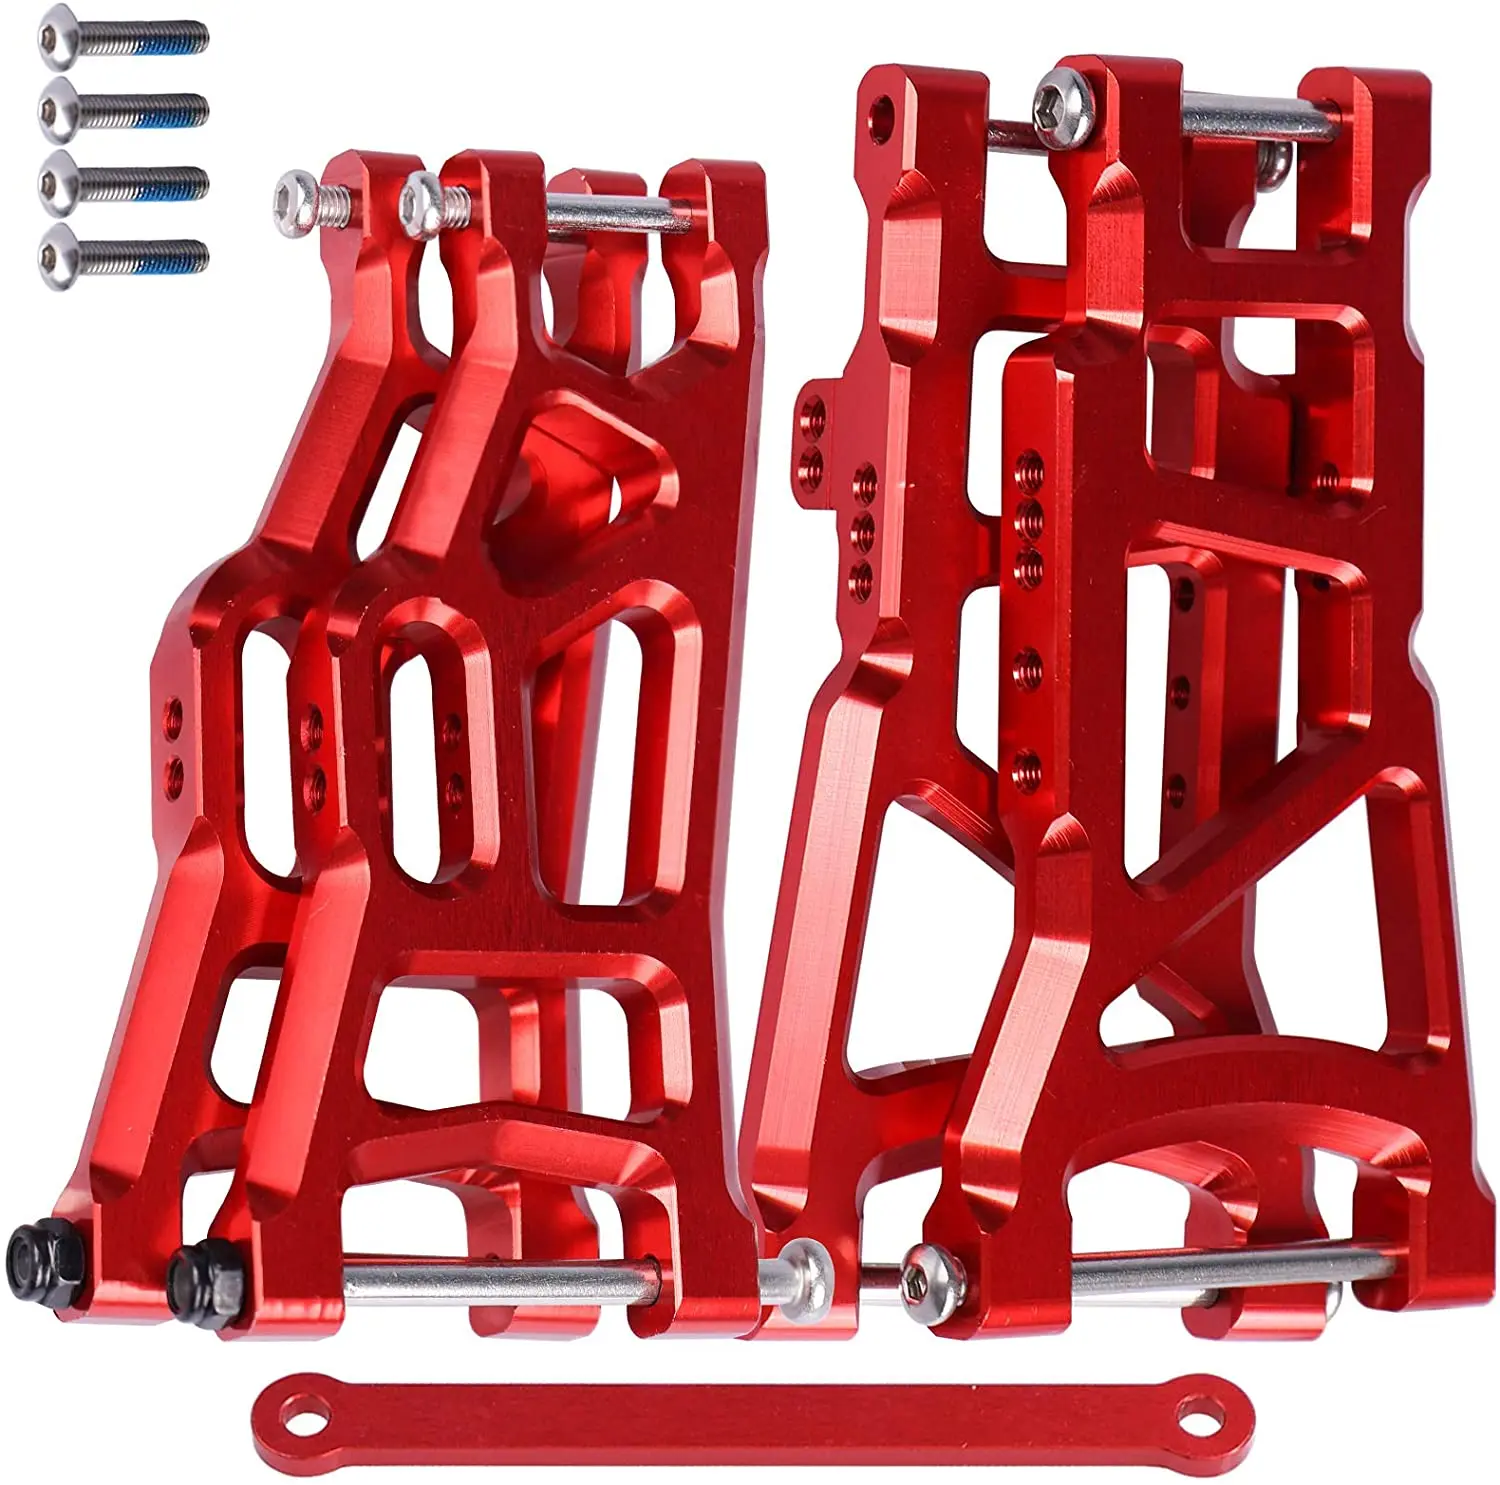 

1set Aluminum Suspension A-Arms (Front&Rear) w/Tie Bar Upgrades for Traxxas 1/10 2WD Slash RC Truck, Replace 2555 3631 2532